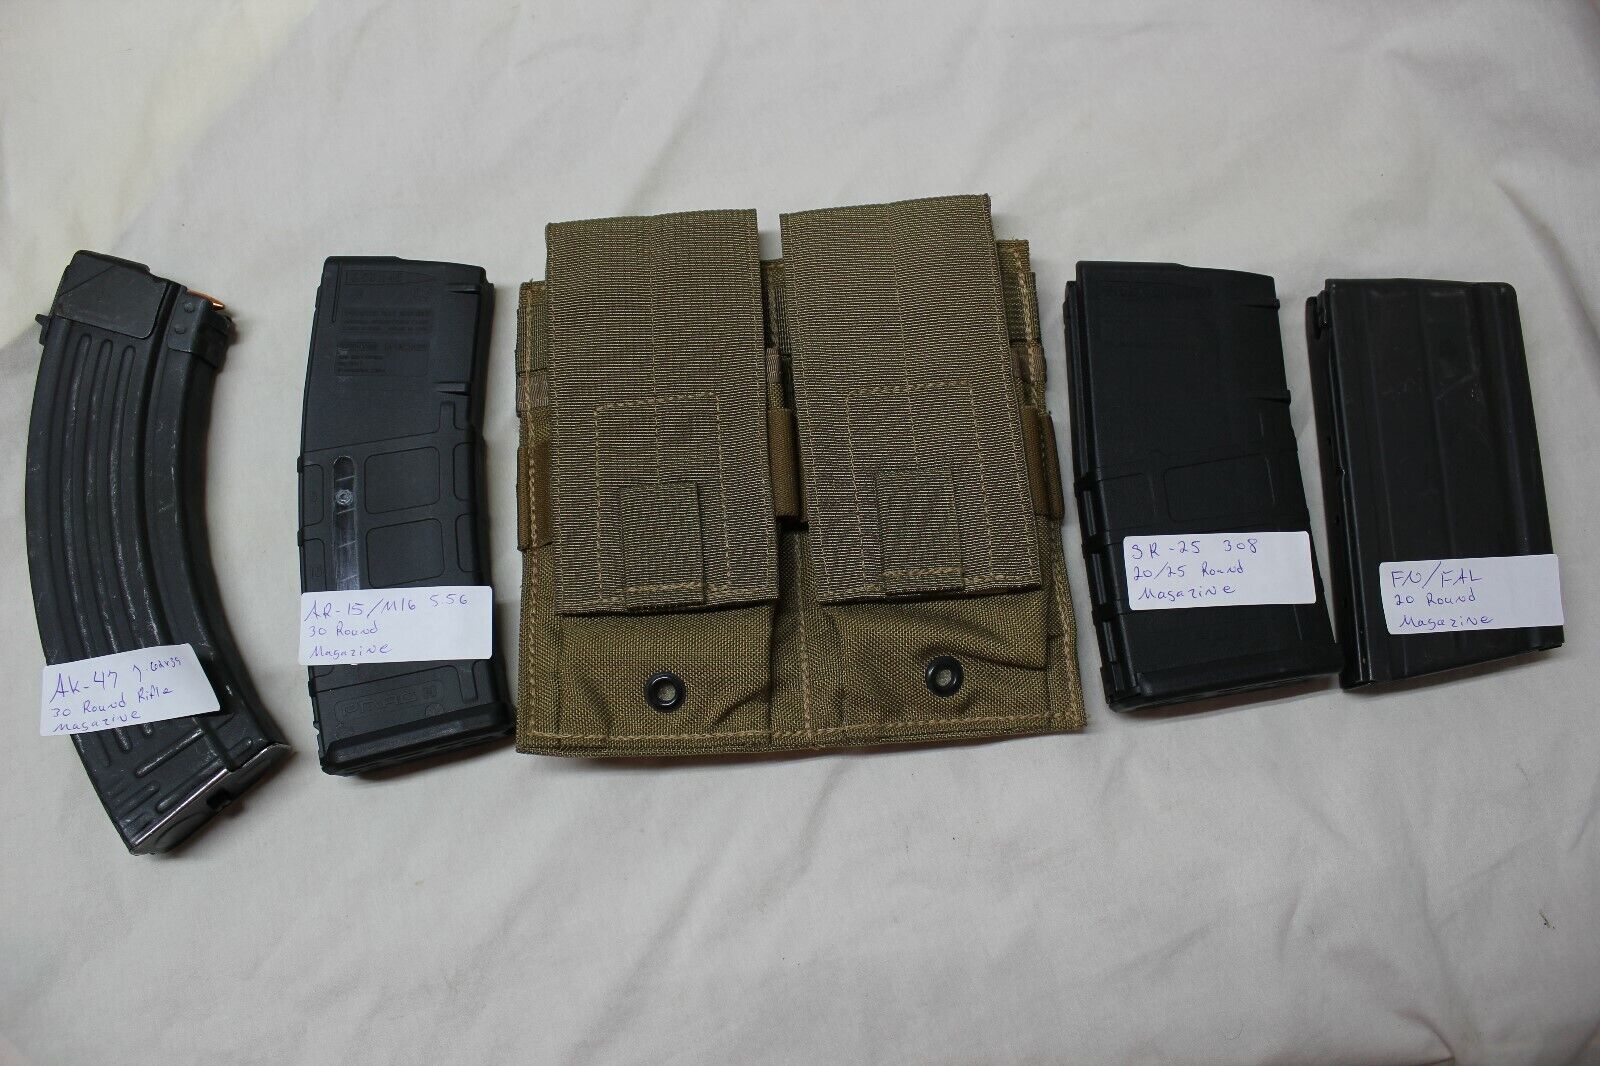 2 US Military Issue USMC Rifle Double Magazine Pouch Coyote Brown 2 308 7.62x51